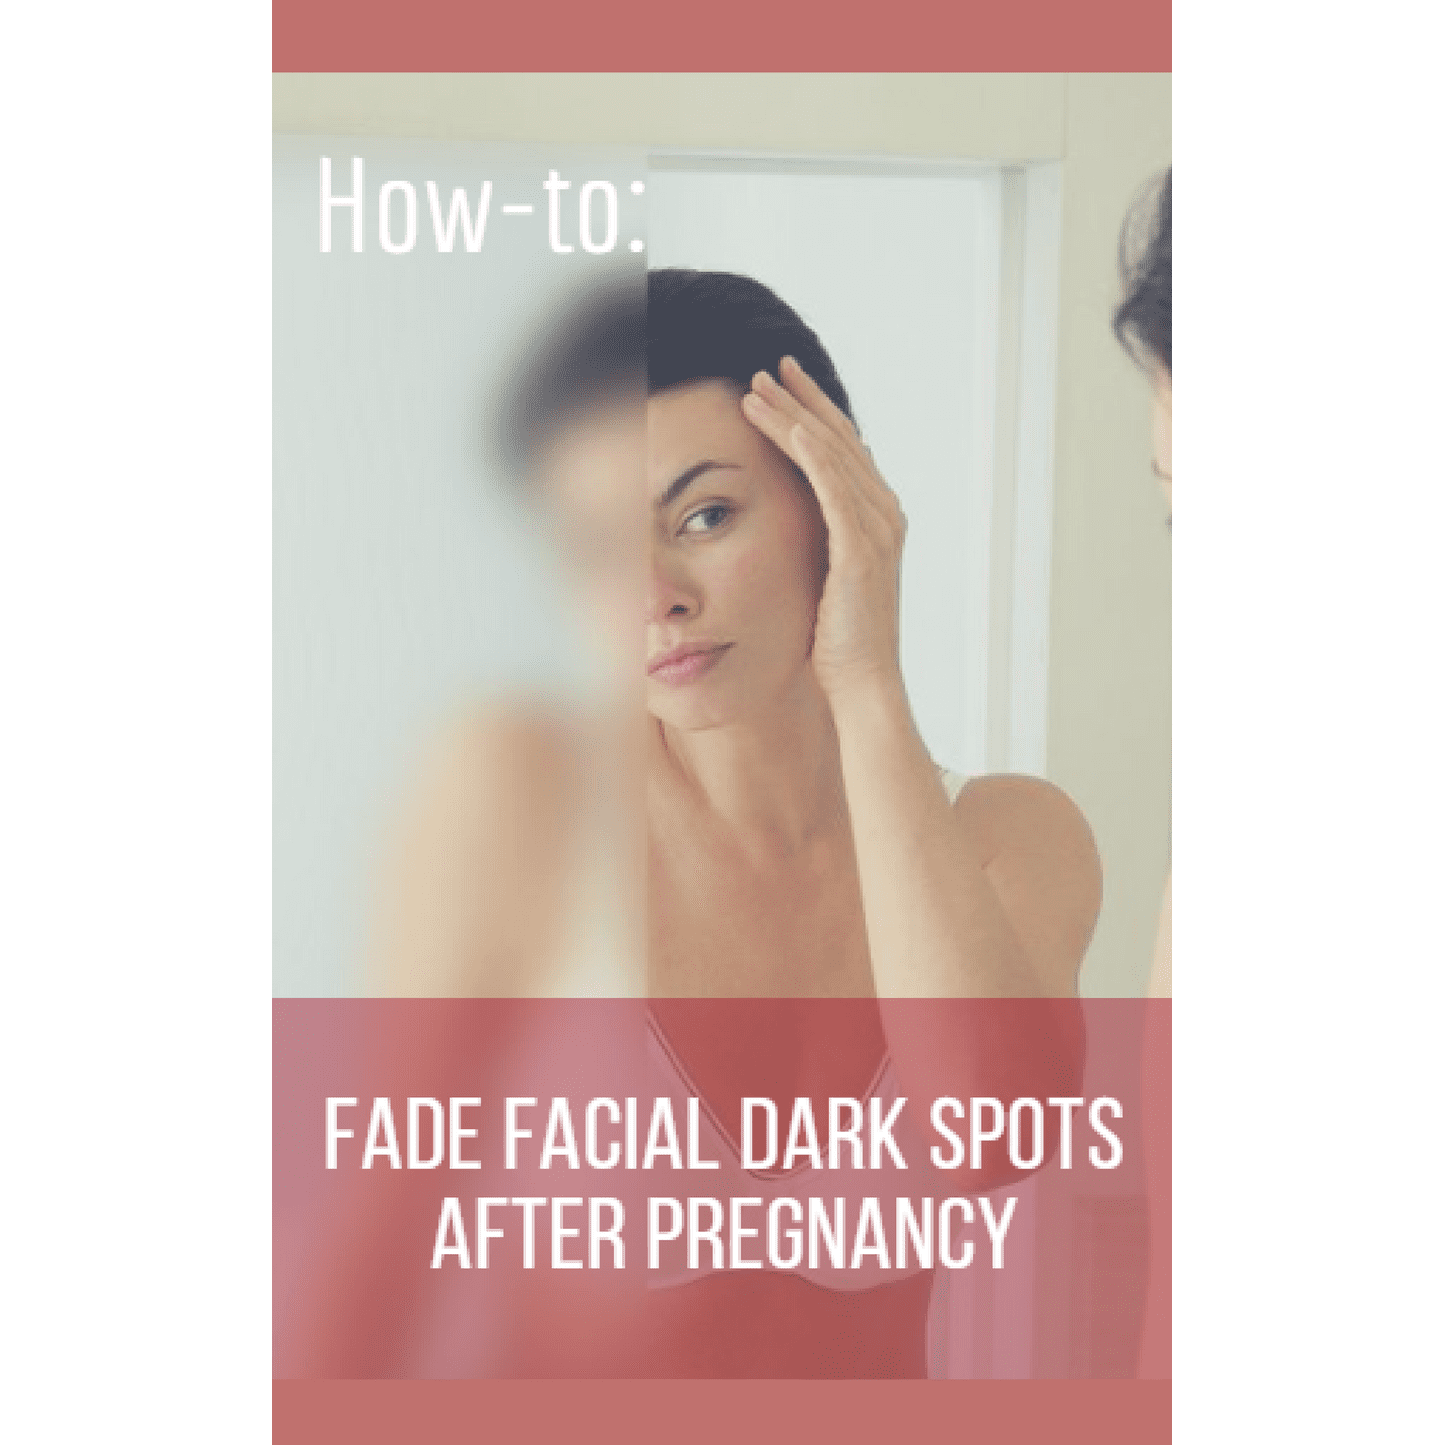 Help! How to fade dark spots after pregnancy